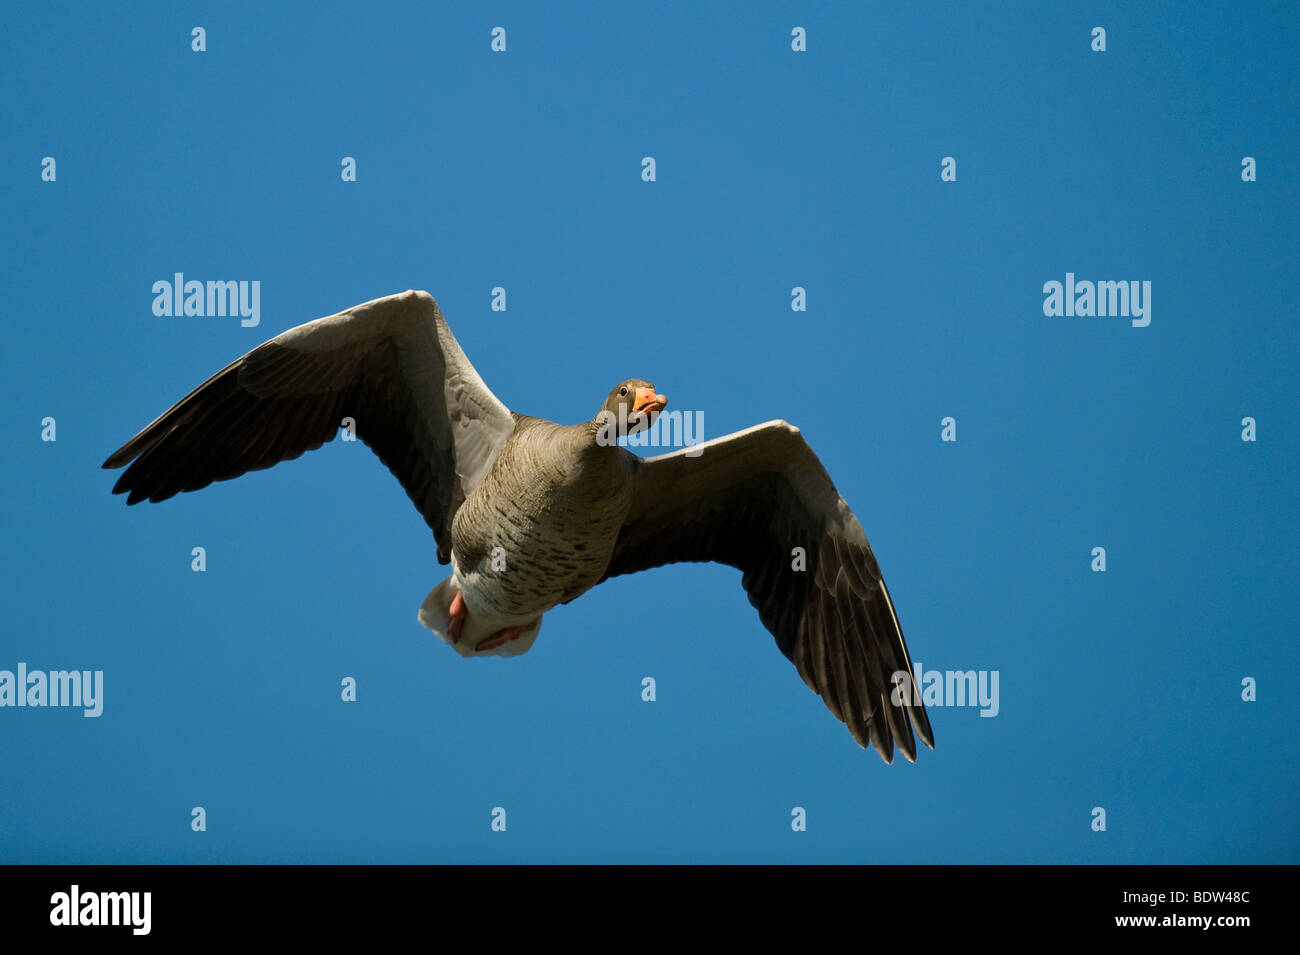 A greylag goose in flight Stock Photo